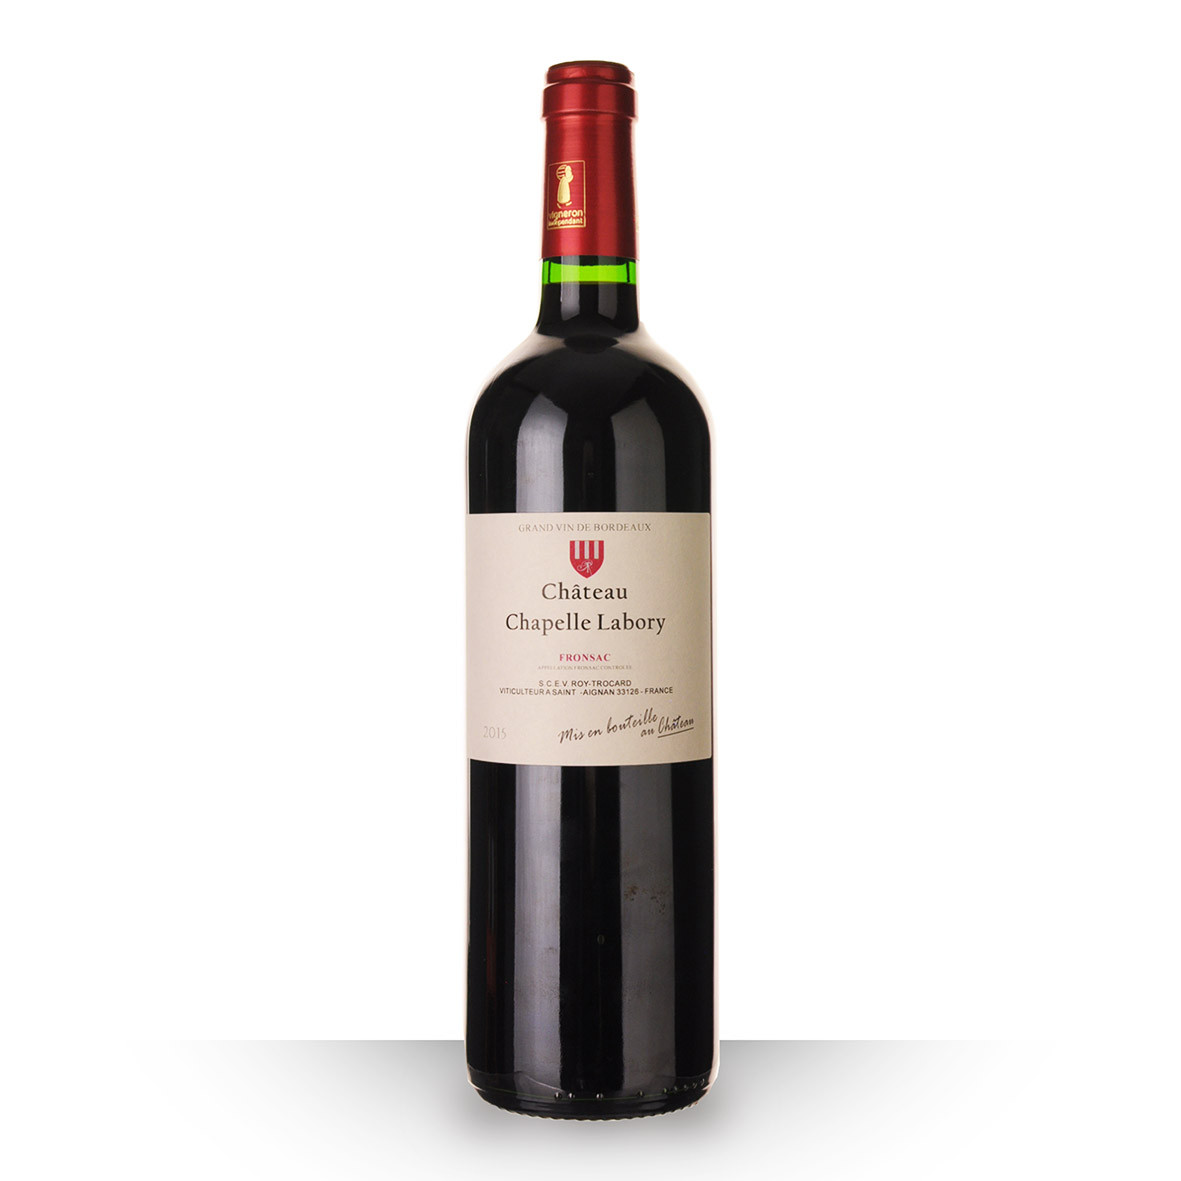 Château Chapelle Labory Fronsac Rouge 2015 75cl www.odyssee-vins.com